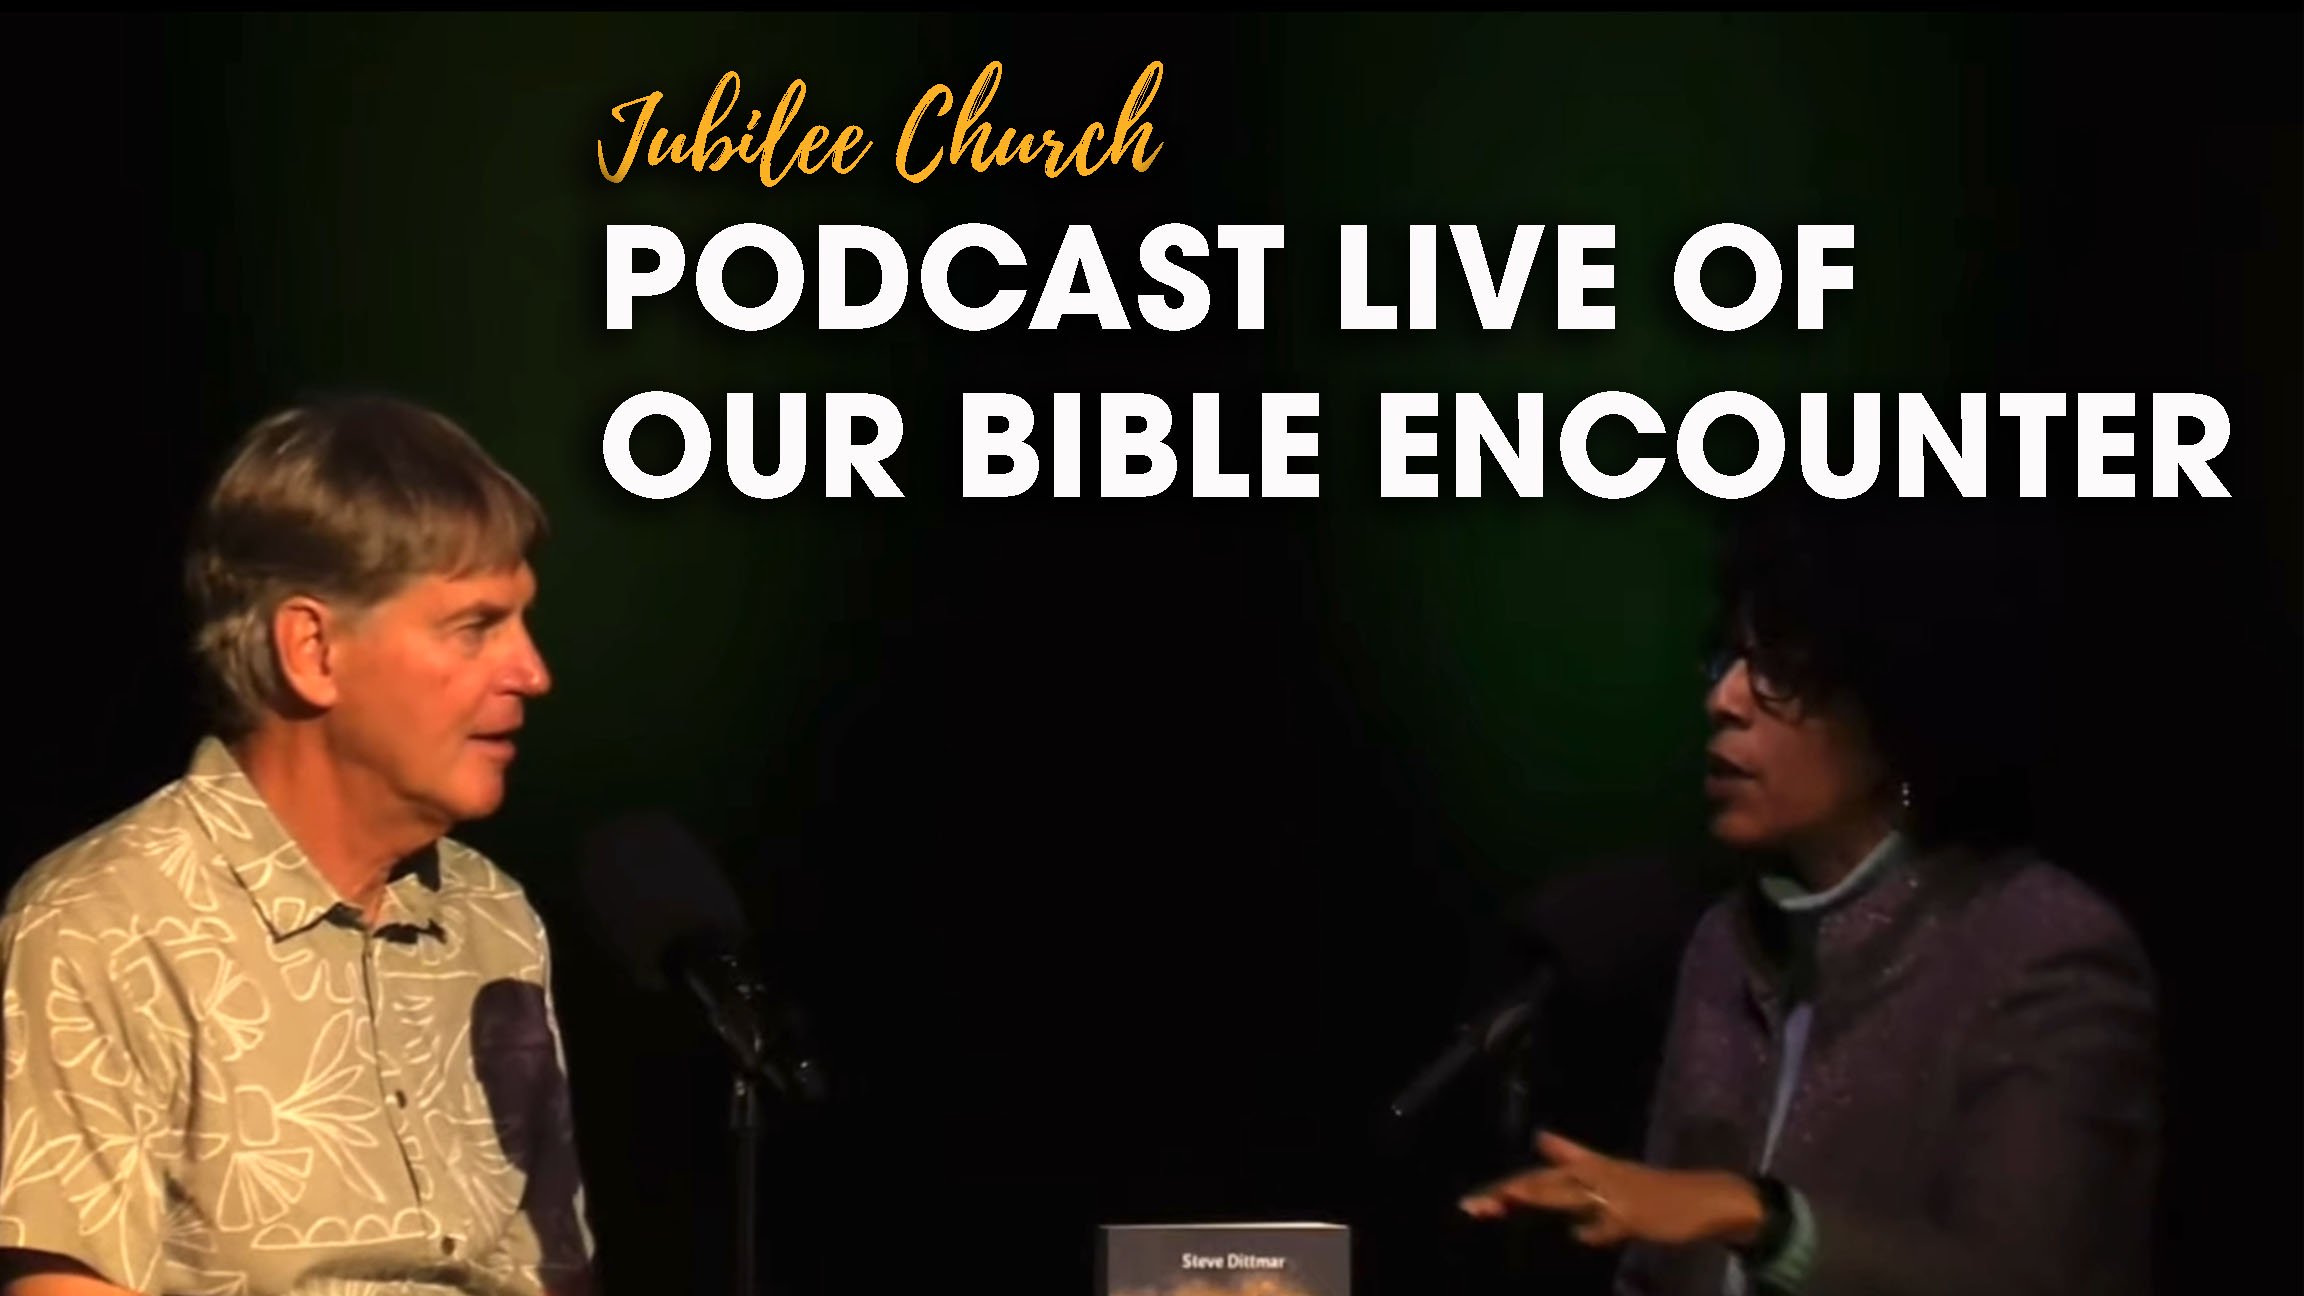 Podcast Live of our Bible Encounter